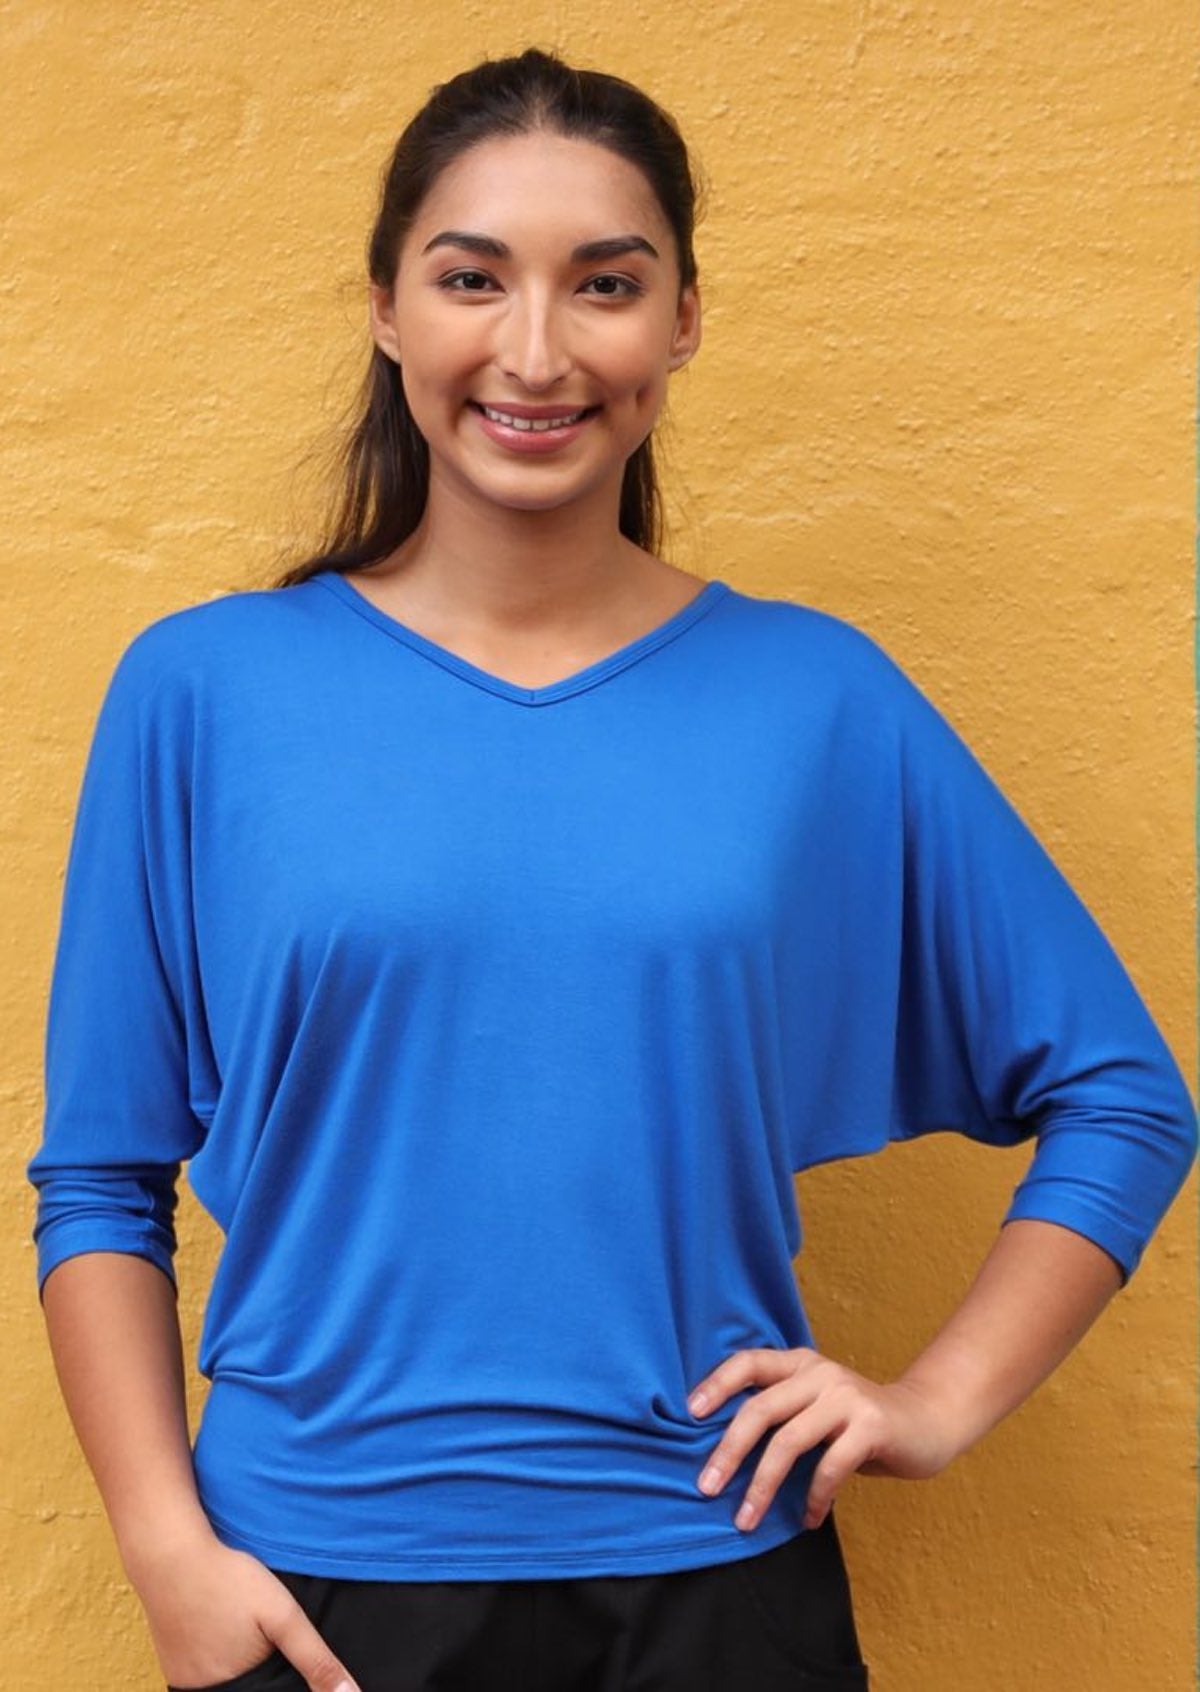 Woman wearing a 3/4 sleeve rayon batwing v-neck blue top.